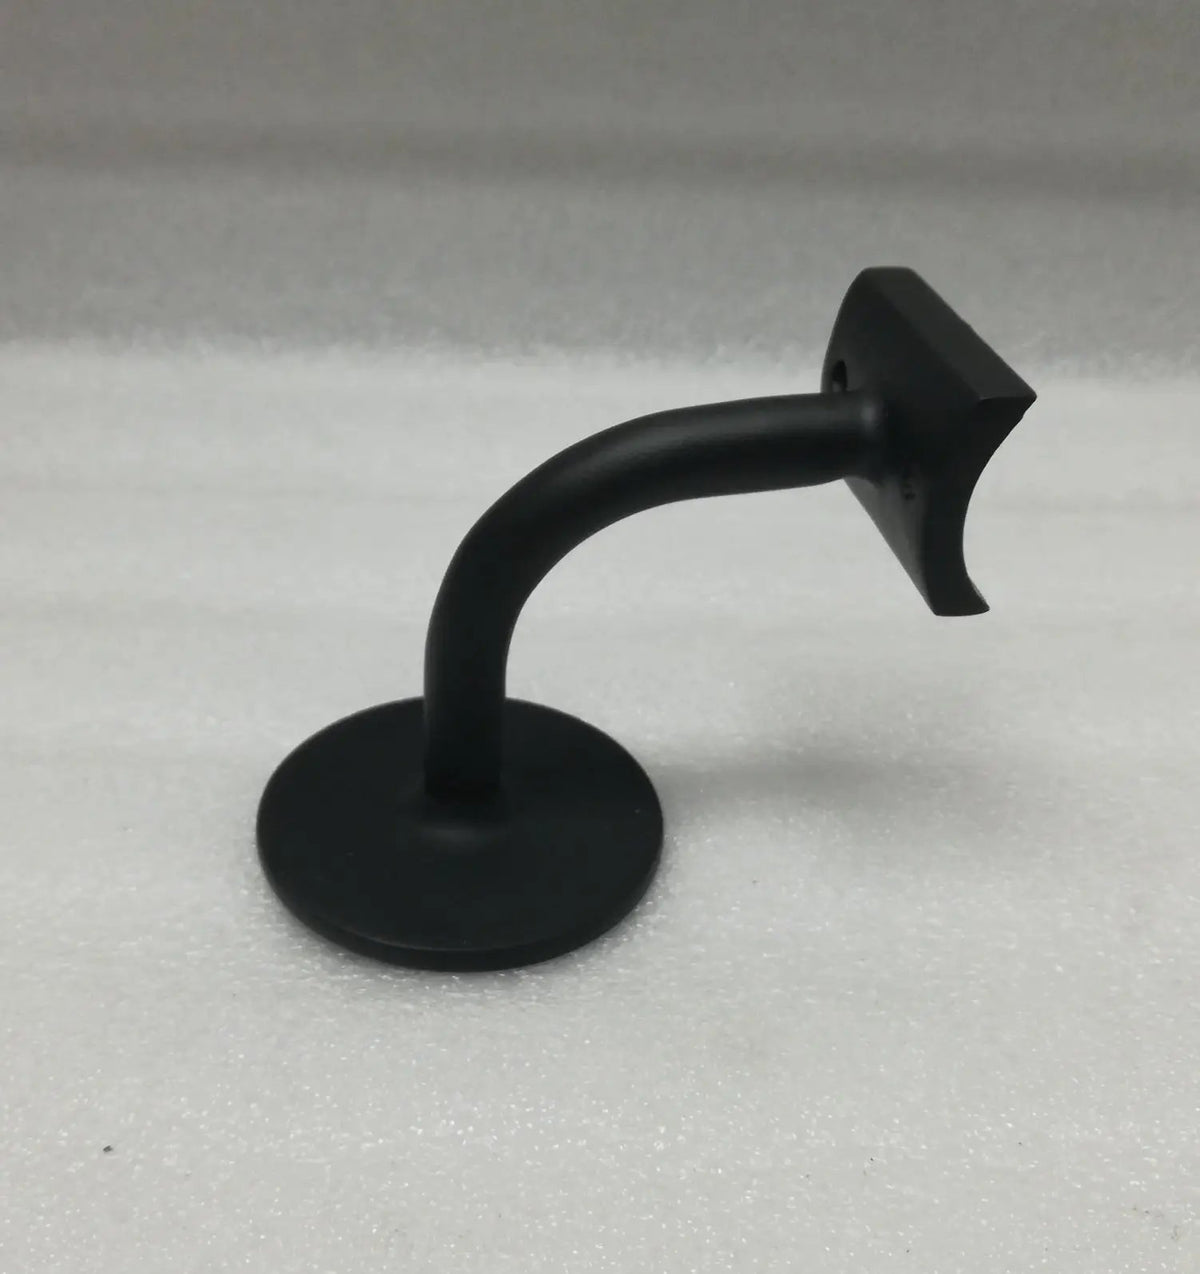 Blind-Stud Hand Rail Bracket for 1-1/2" Tubing Brackets, Components for 1-1/2" Od TubingTrade Diversified